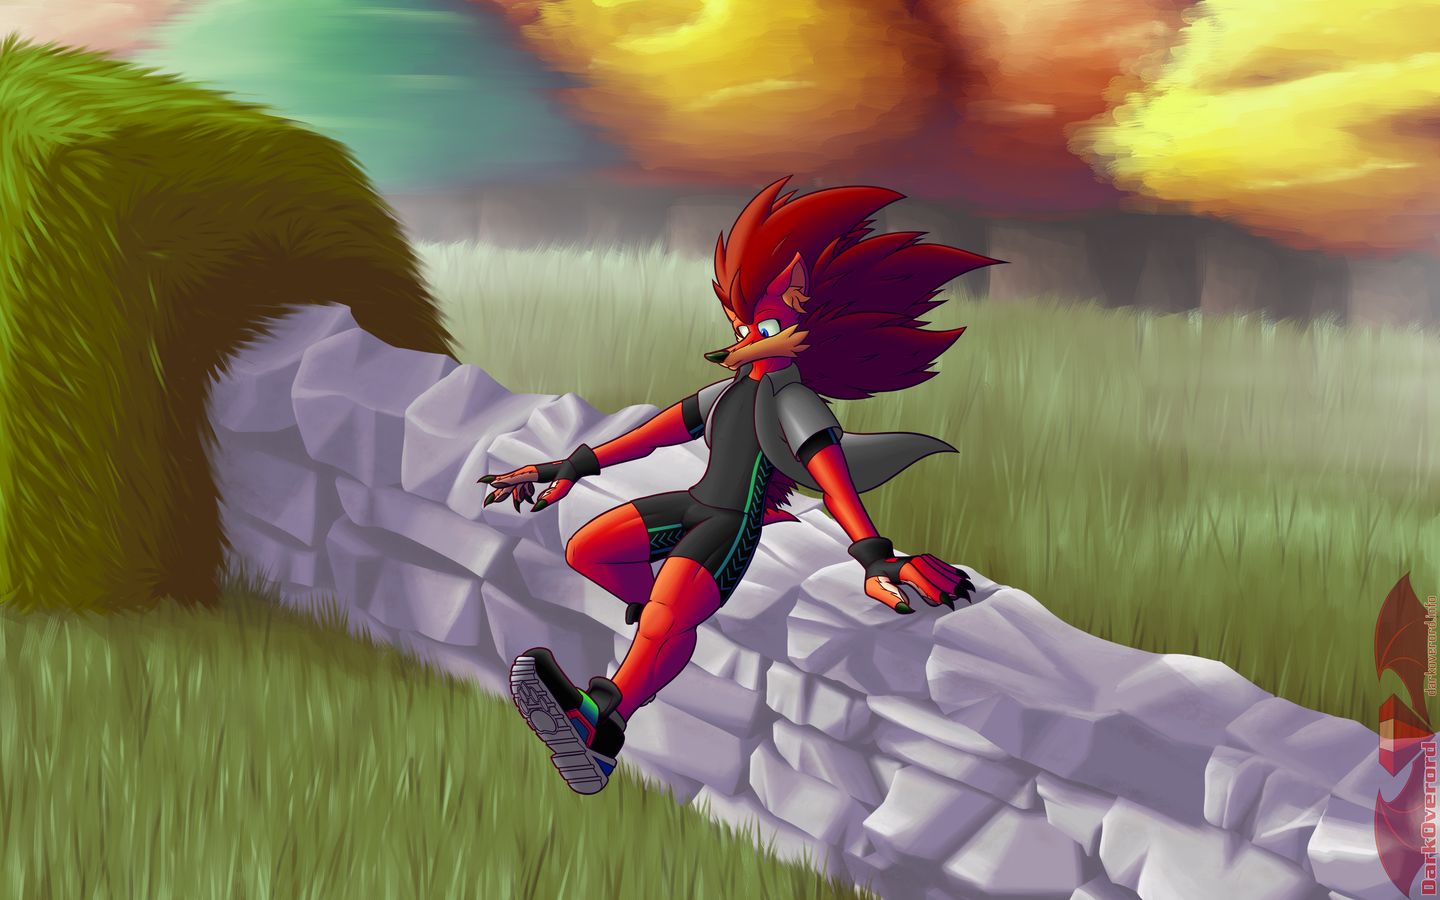 in an autumn scene, Simon, a red hedgehog wearing shoes, gloves a grey shirt and compression shorts & tshirt, vaults over a rock wall.

It is slightly misty in the background as well, desaturating the trees behind them